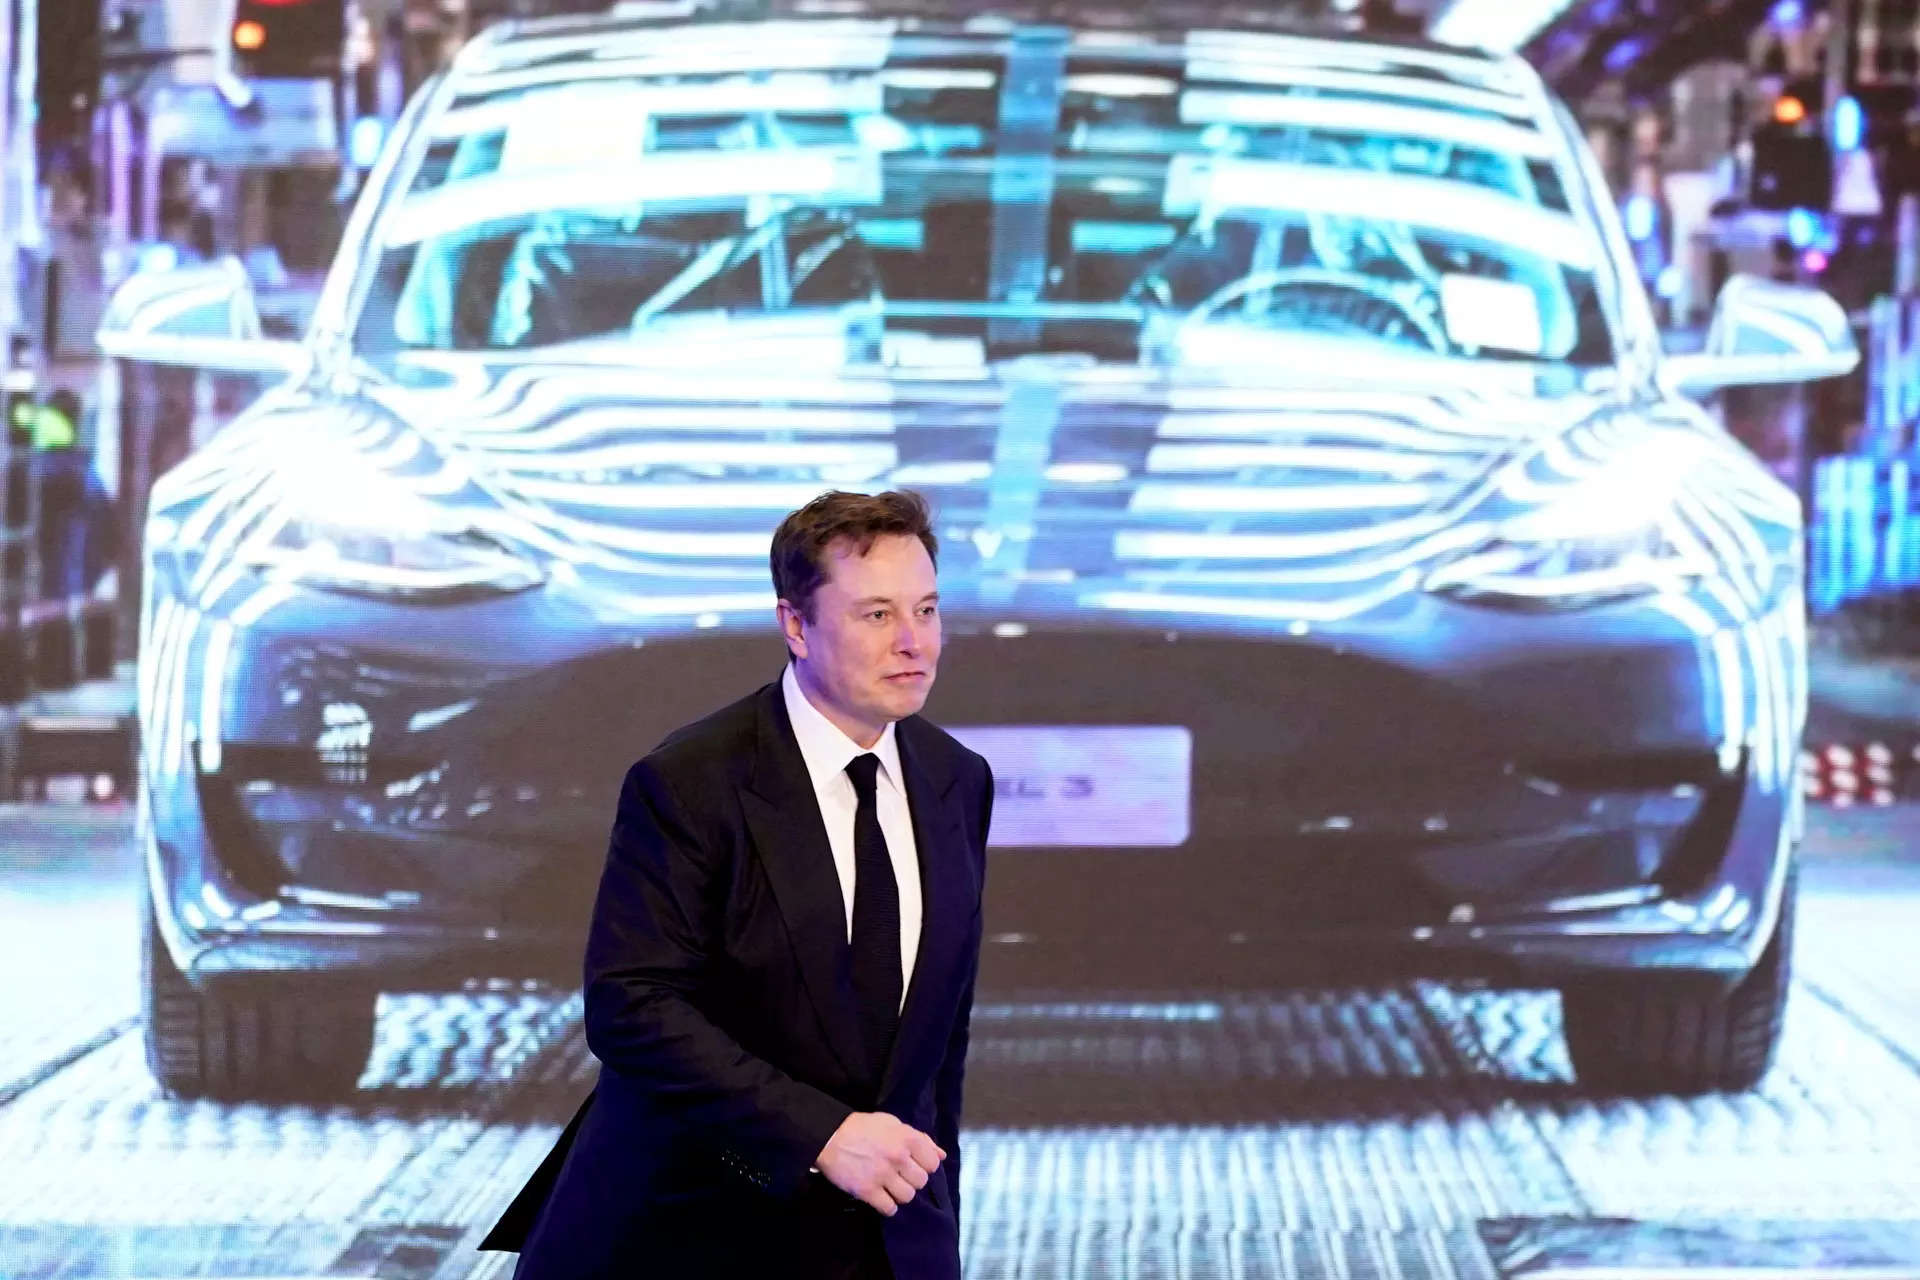 How will Elon Musk's Tesla look in the future? Fasten your seatbelt to experience a world of robots, self-driving cars, and more 